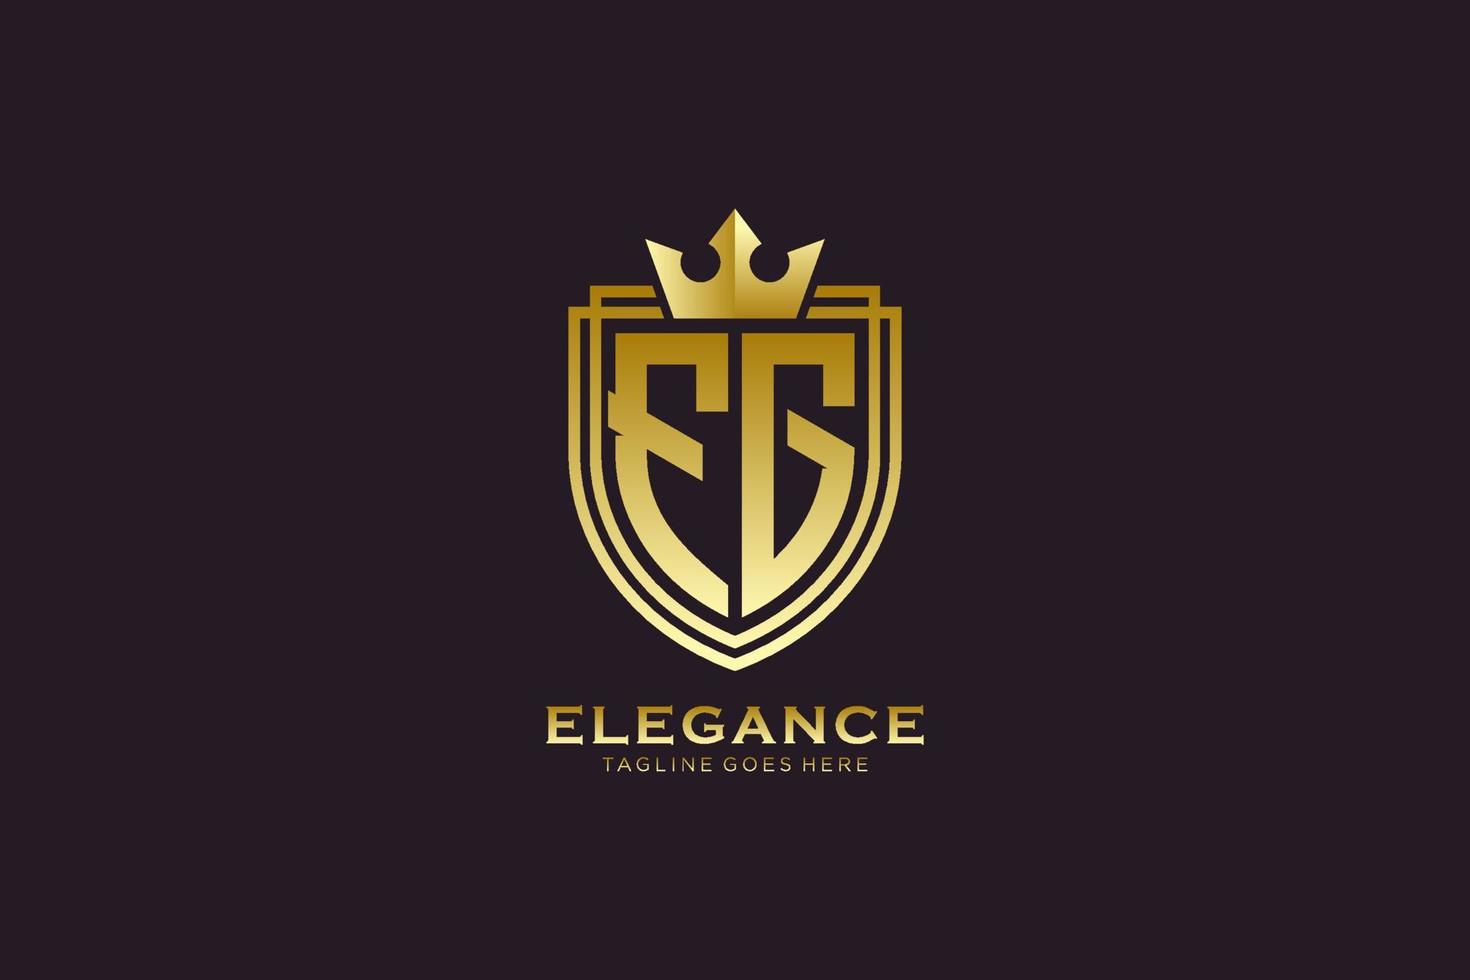 initial FG elegant luxury monogram logo or badge template with scrolls and royal crown - perfect for luxurious branding projects vector